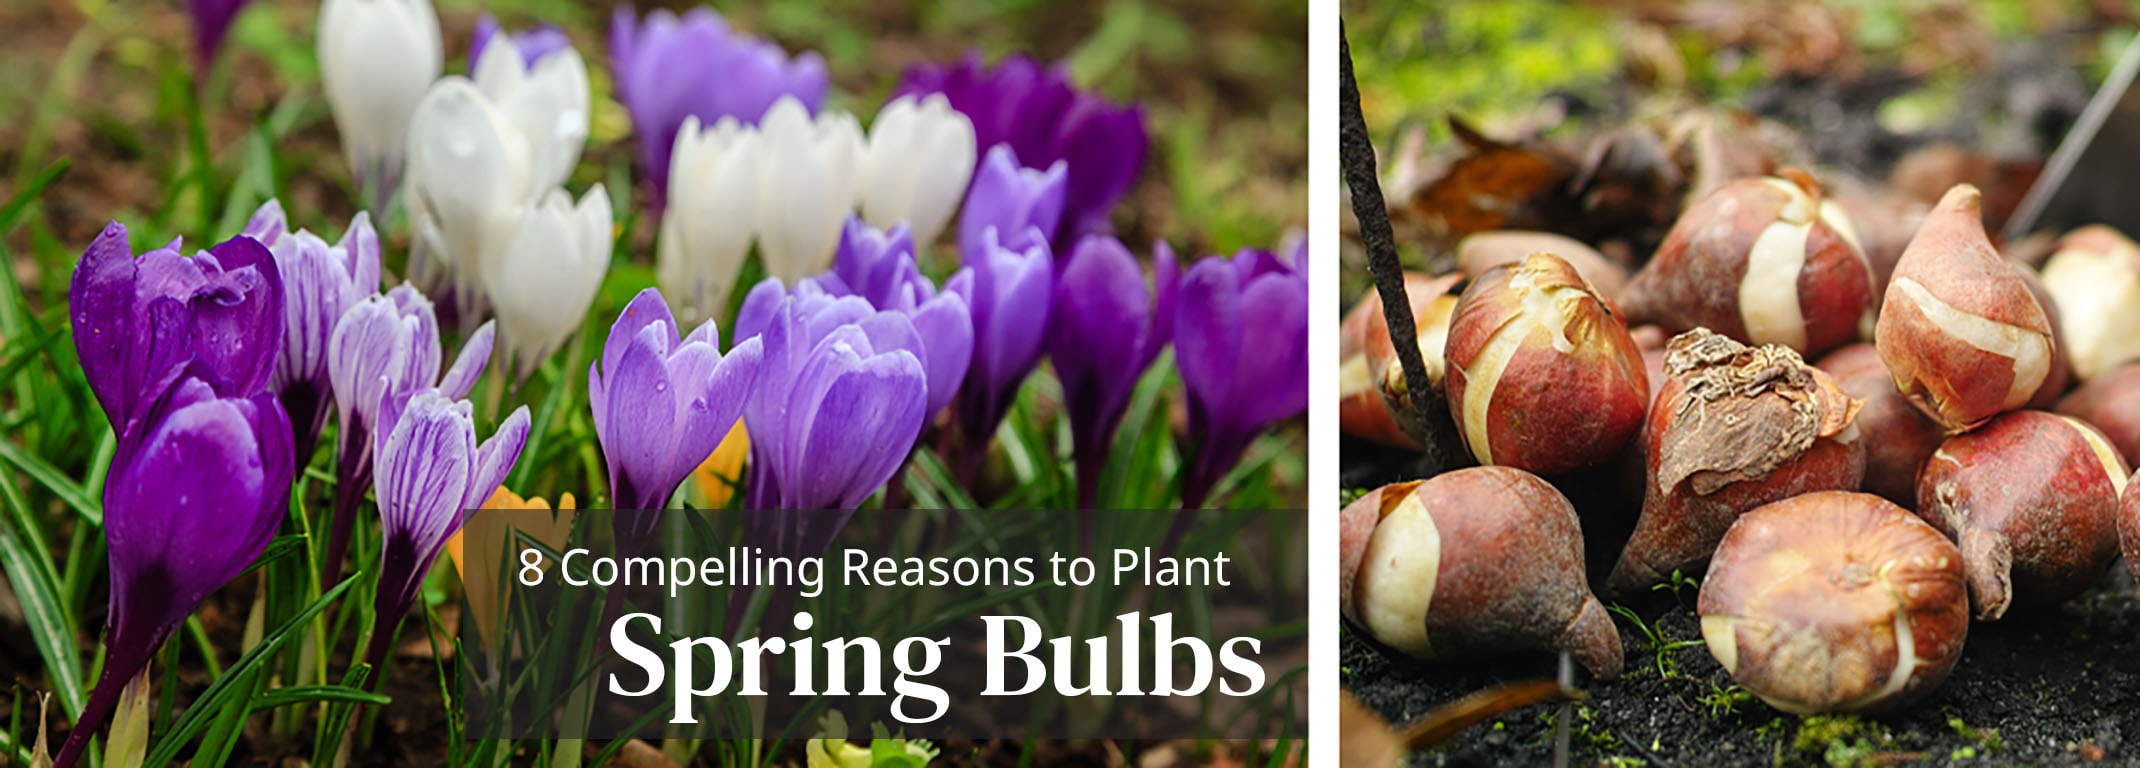 8 compelling reasons to plant spring bulbs crocus and tulip bulbs to plant